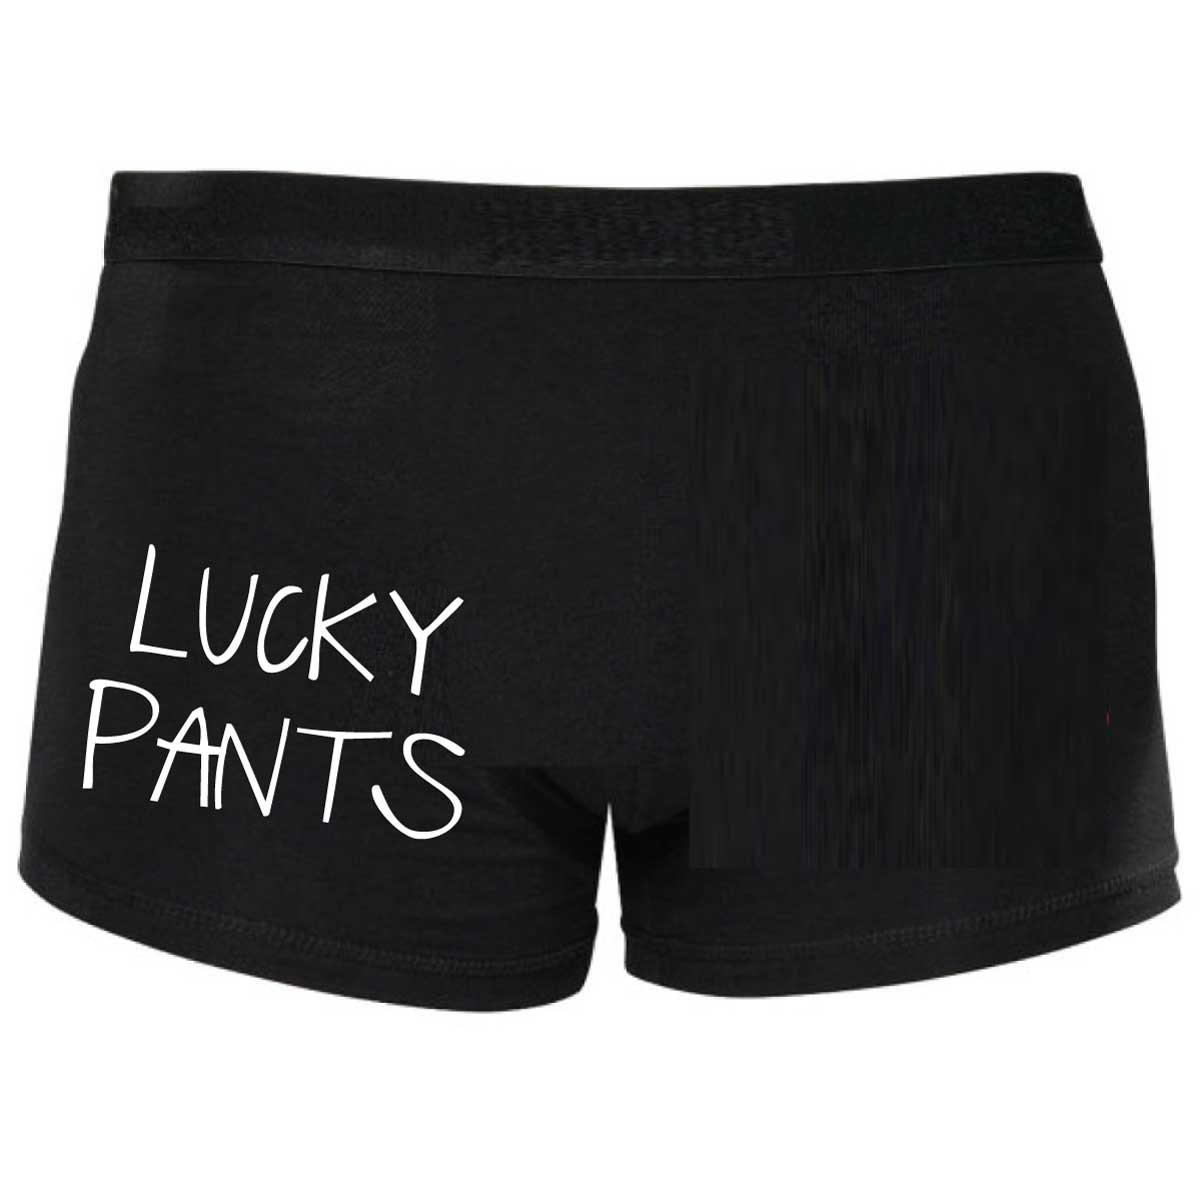 Lucky Pants Boxers Shorty Boxers